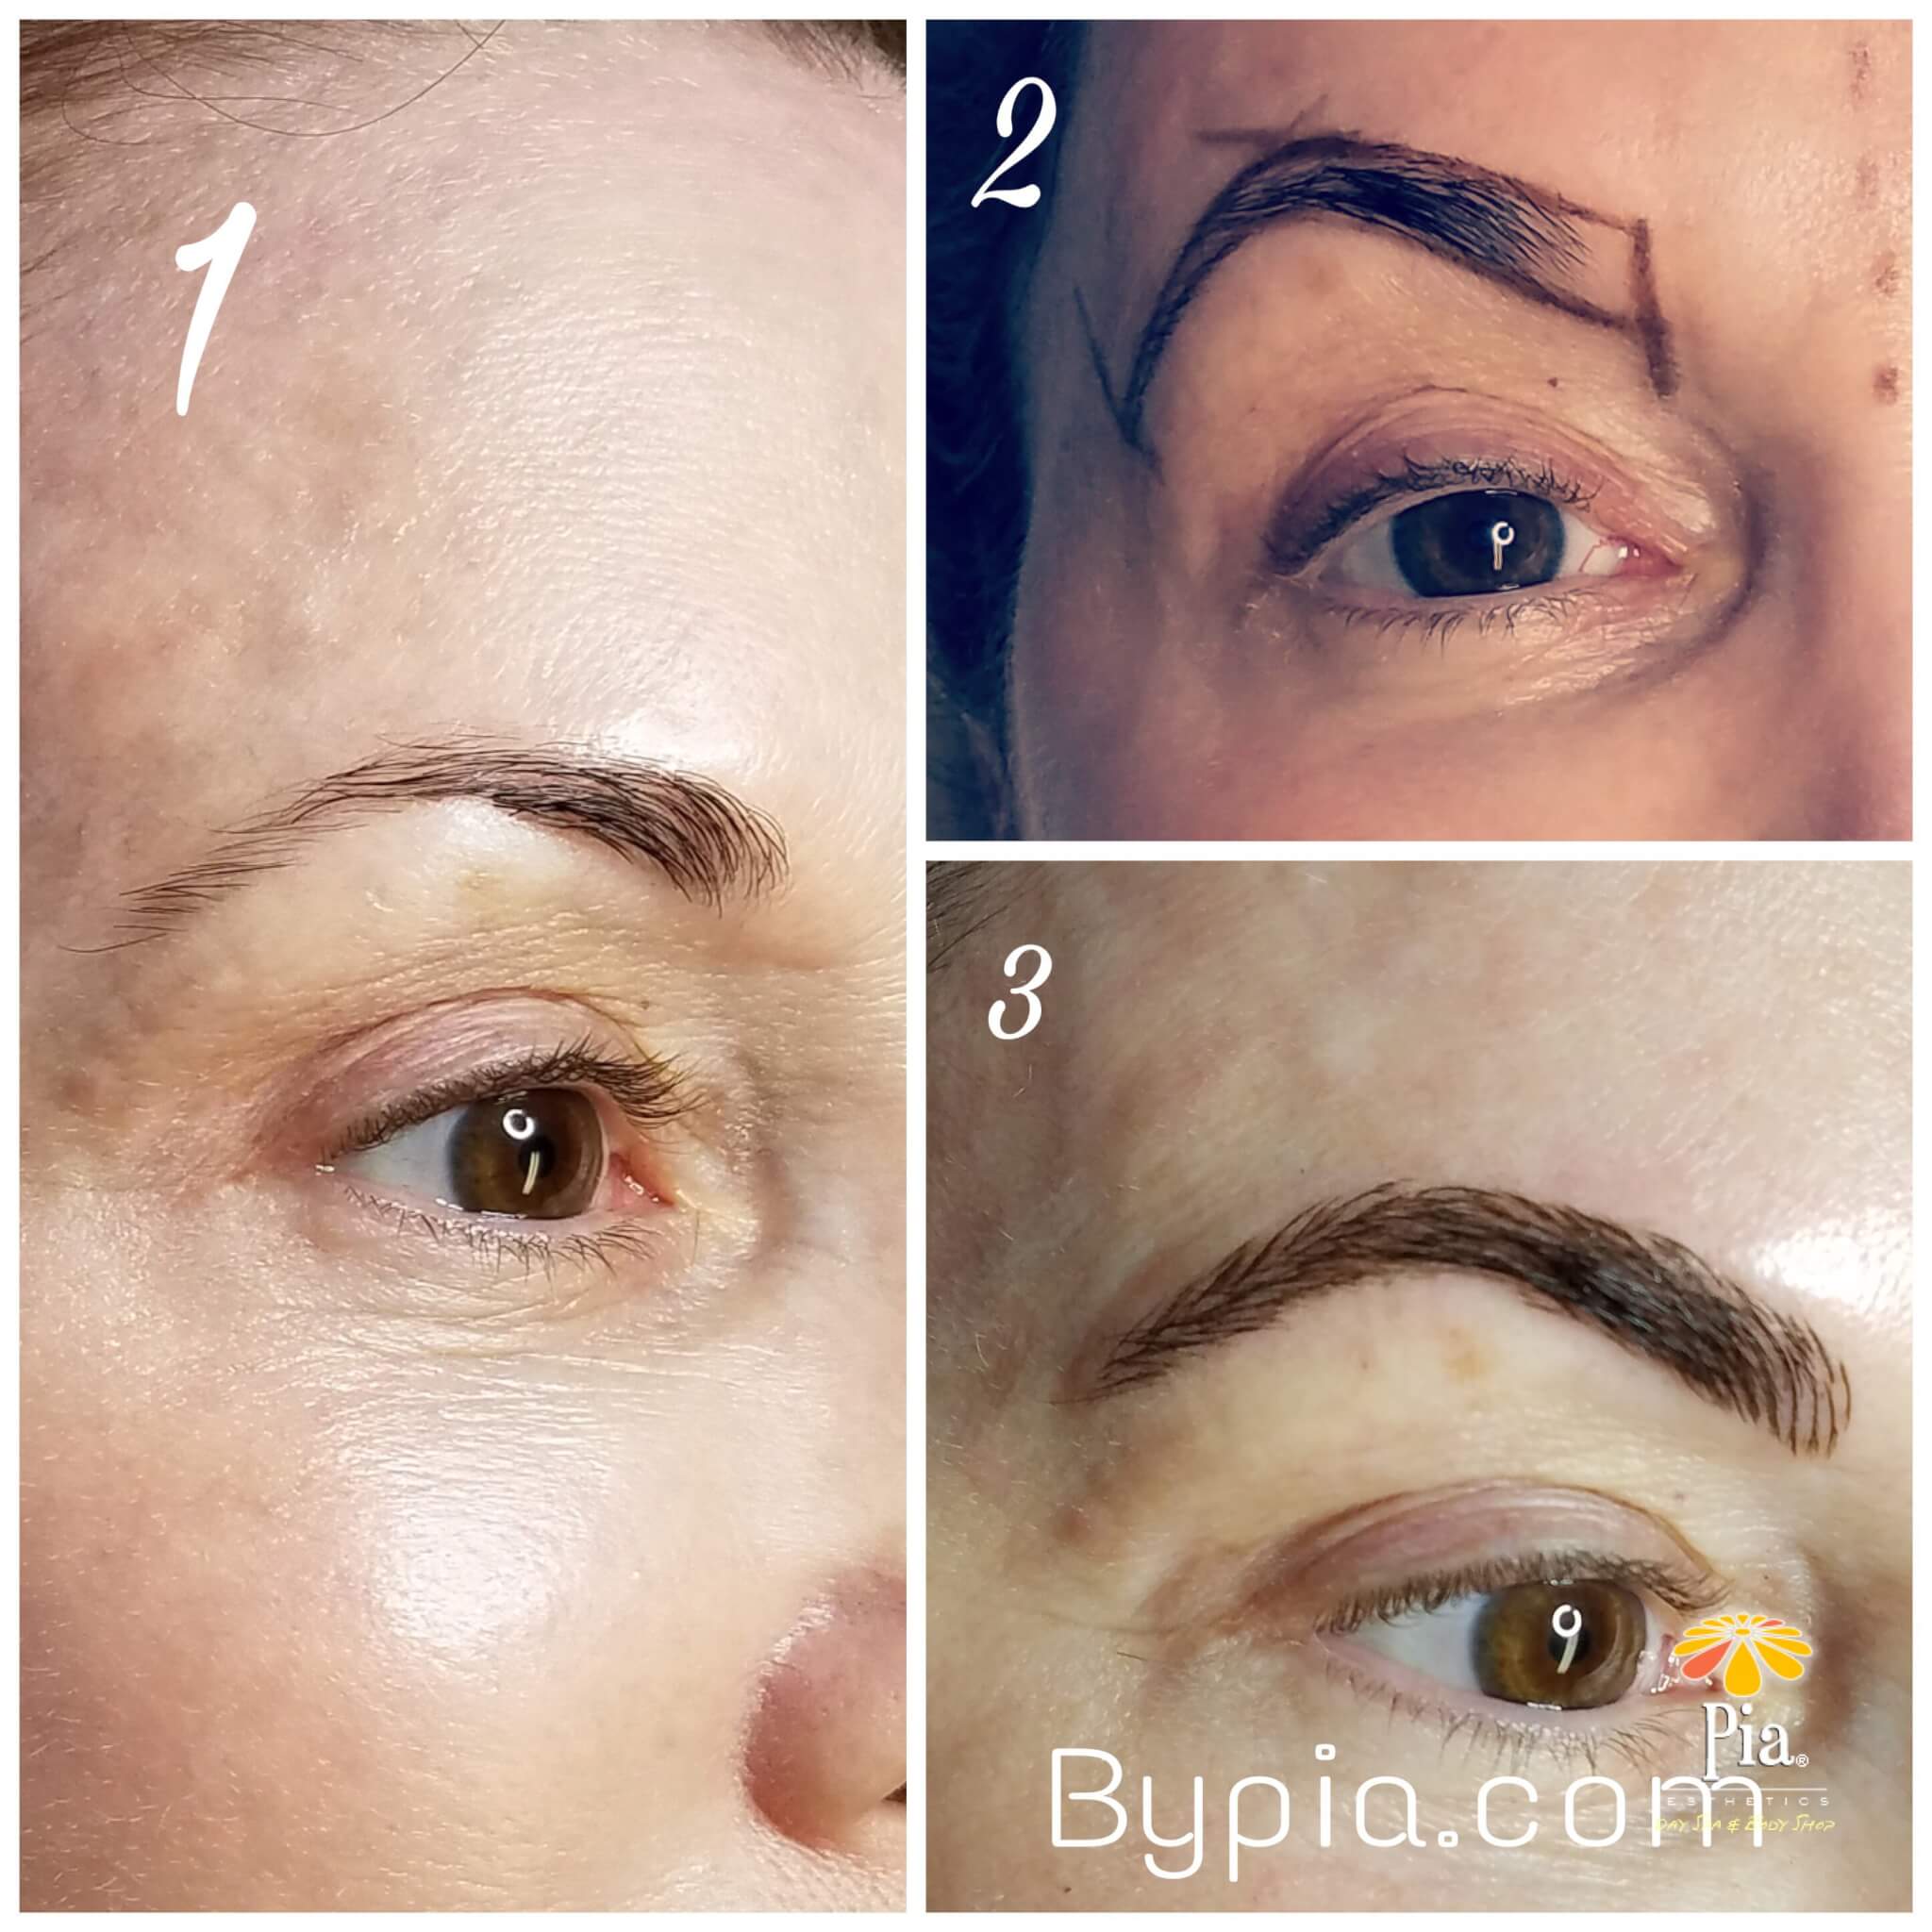 microblading, brows, microbladingbrows, browreconstruction, eyebrowenhancement, betterbrows, browembroidery